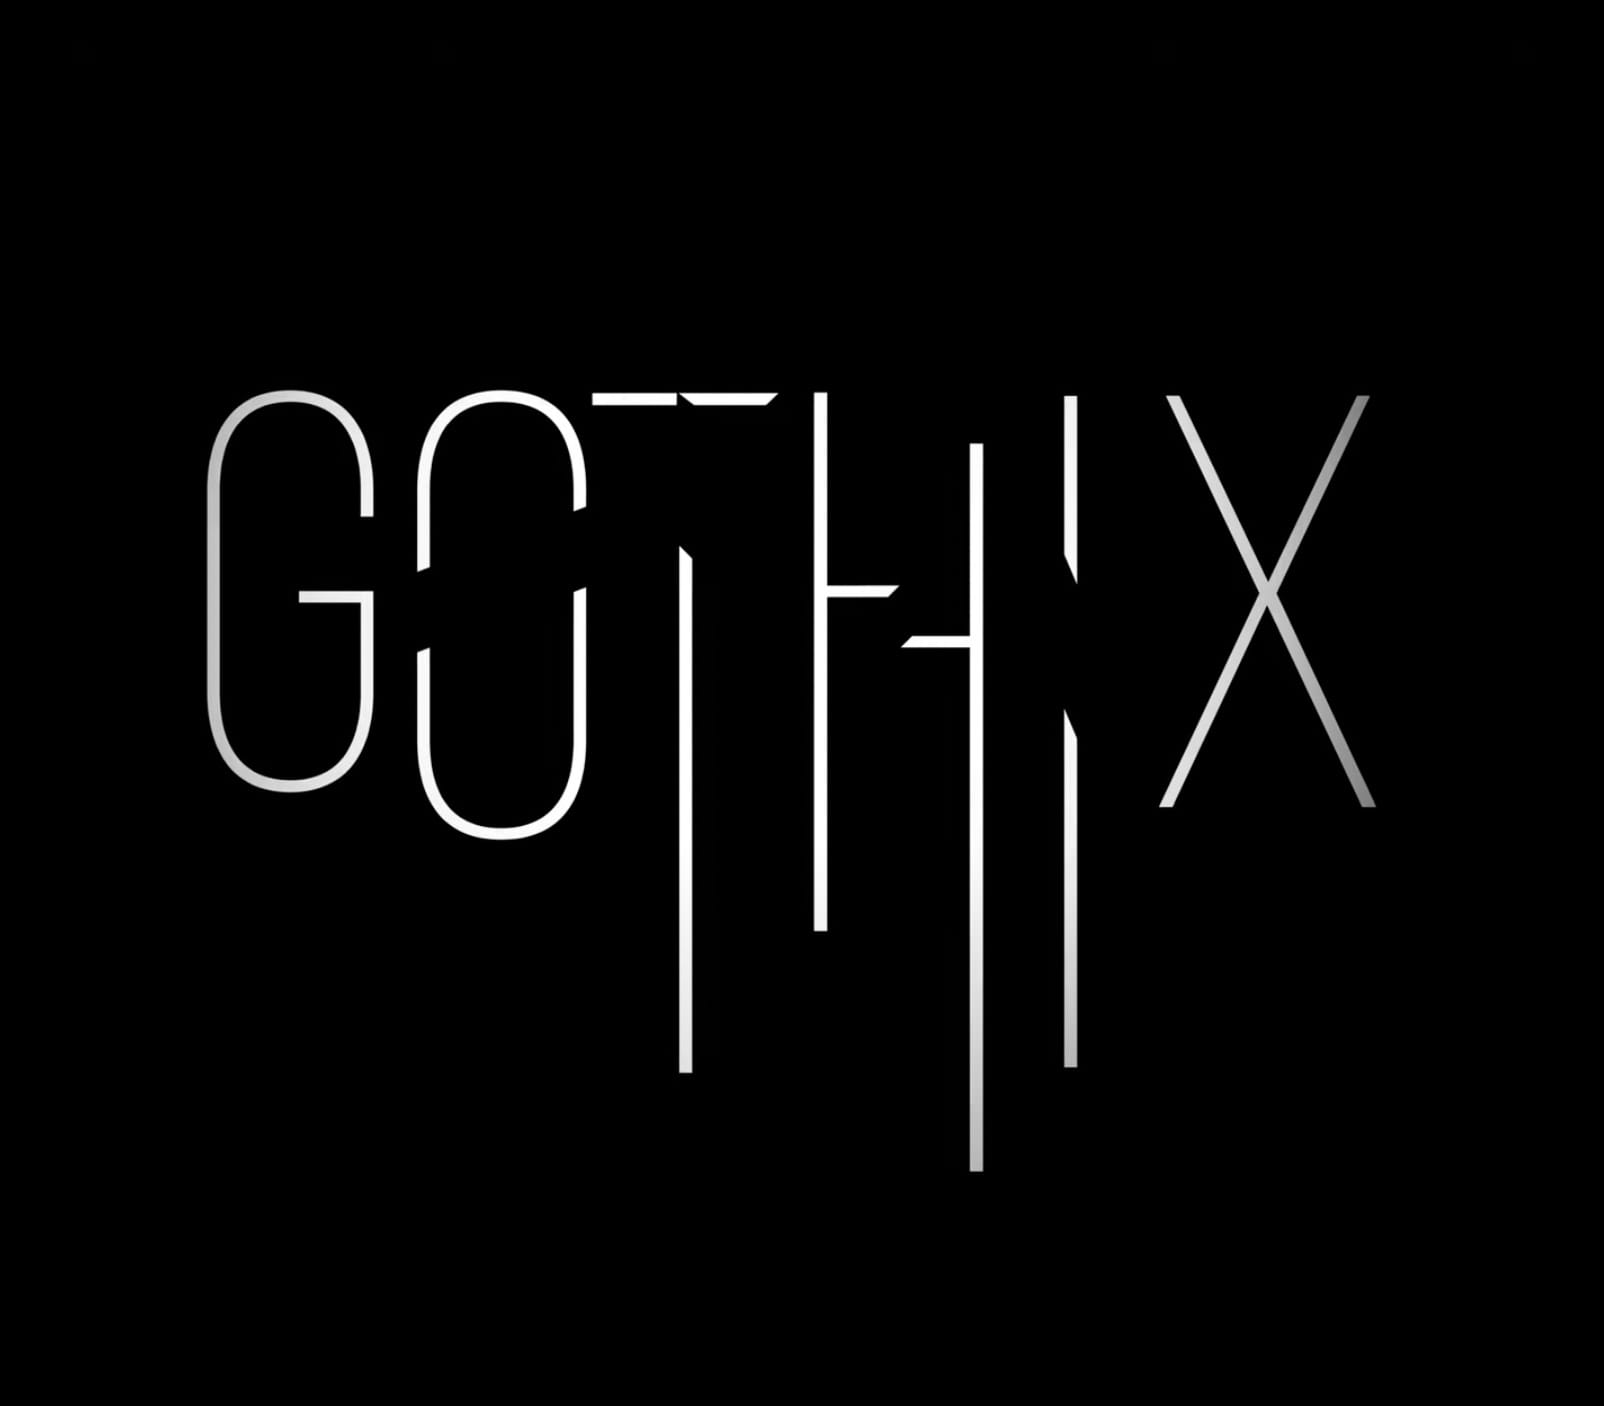 New Avant-Garde Faith-Based Platform, LOOR.tv, Releases GOTHIX Doc to Subscribers December 19th